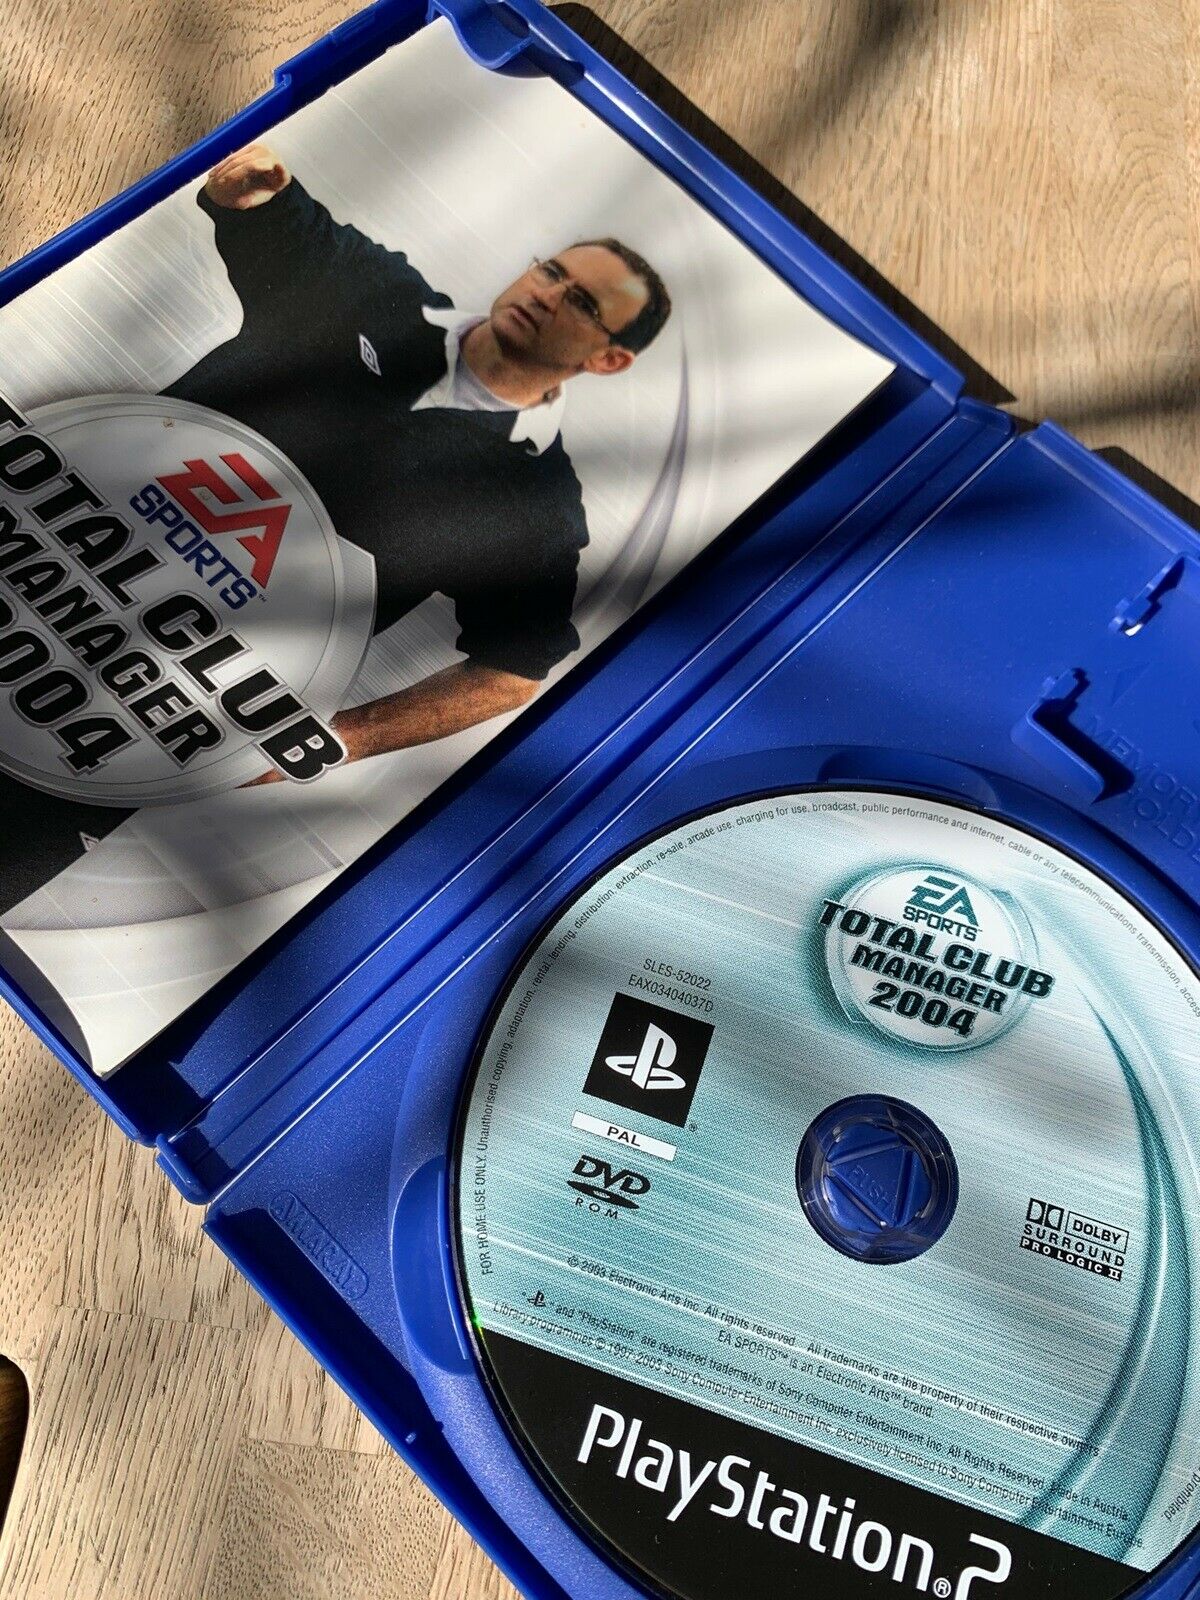 Total club manager 2004, PS2, sport